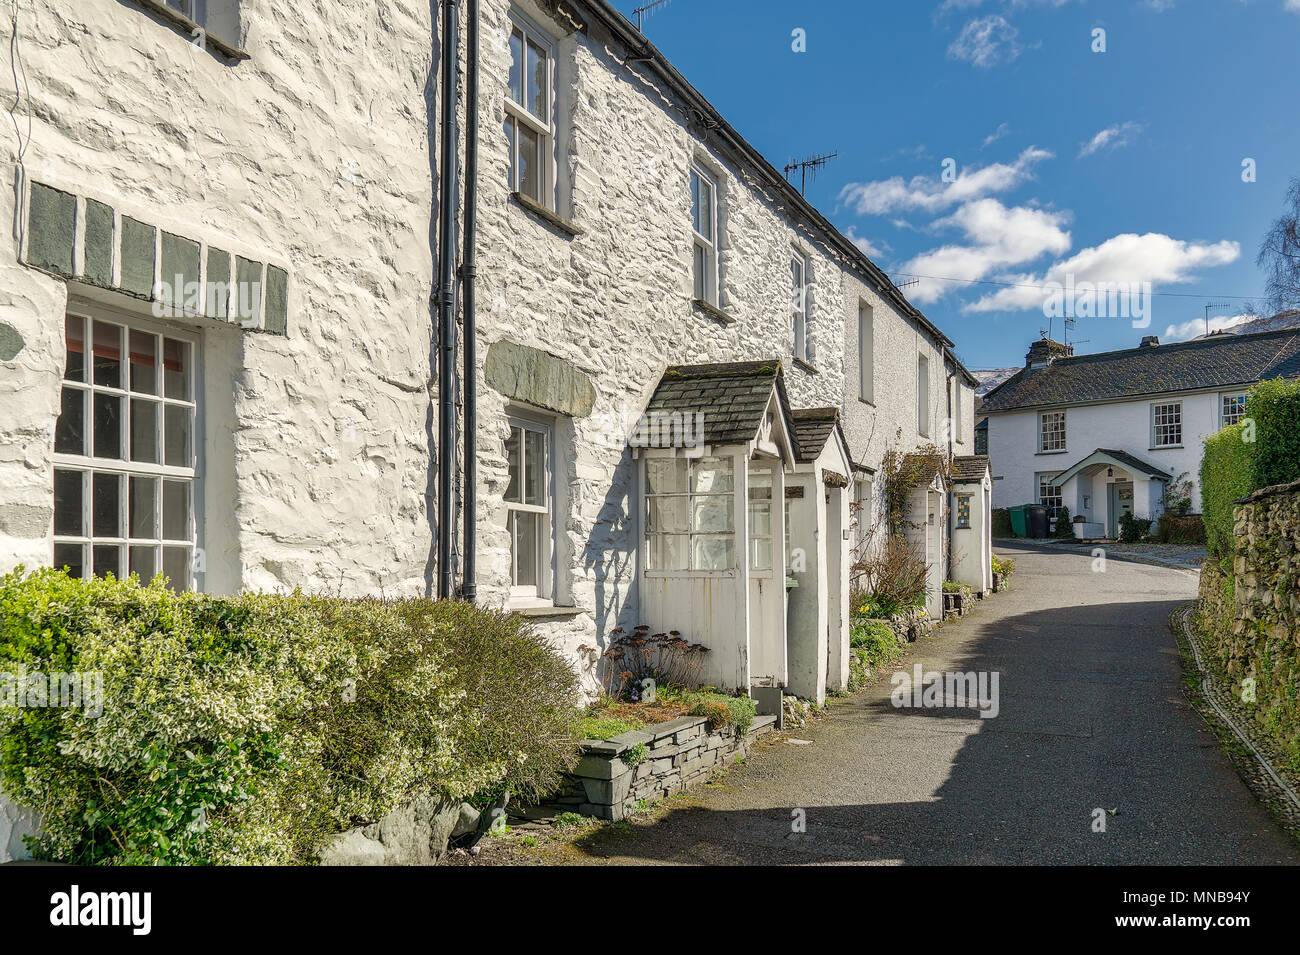 A row of whitewashed cottages in Ambleside, the English Lake Dis Stock Photo